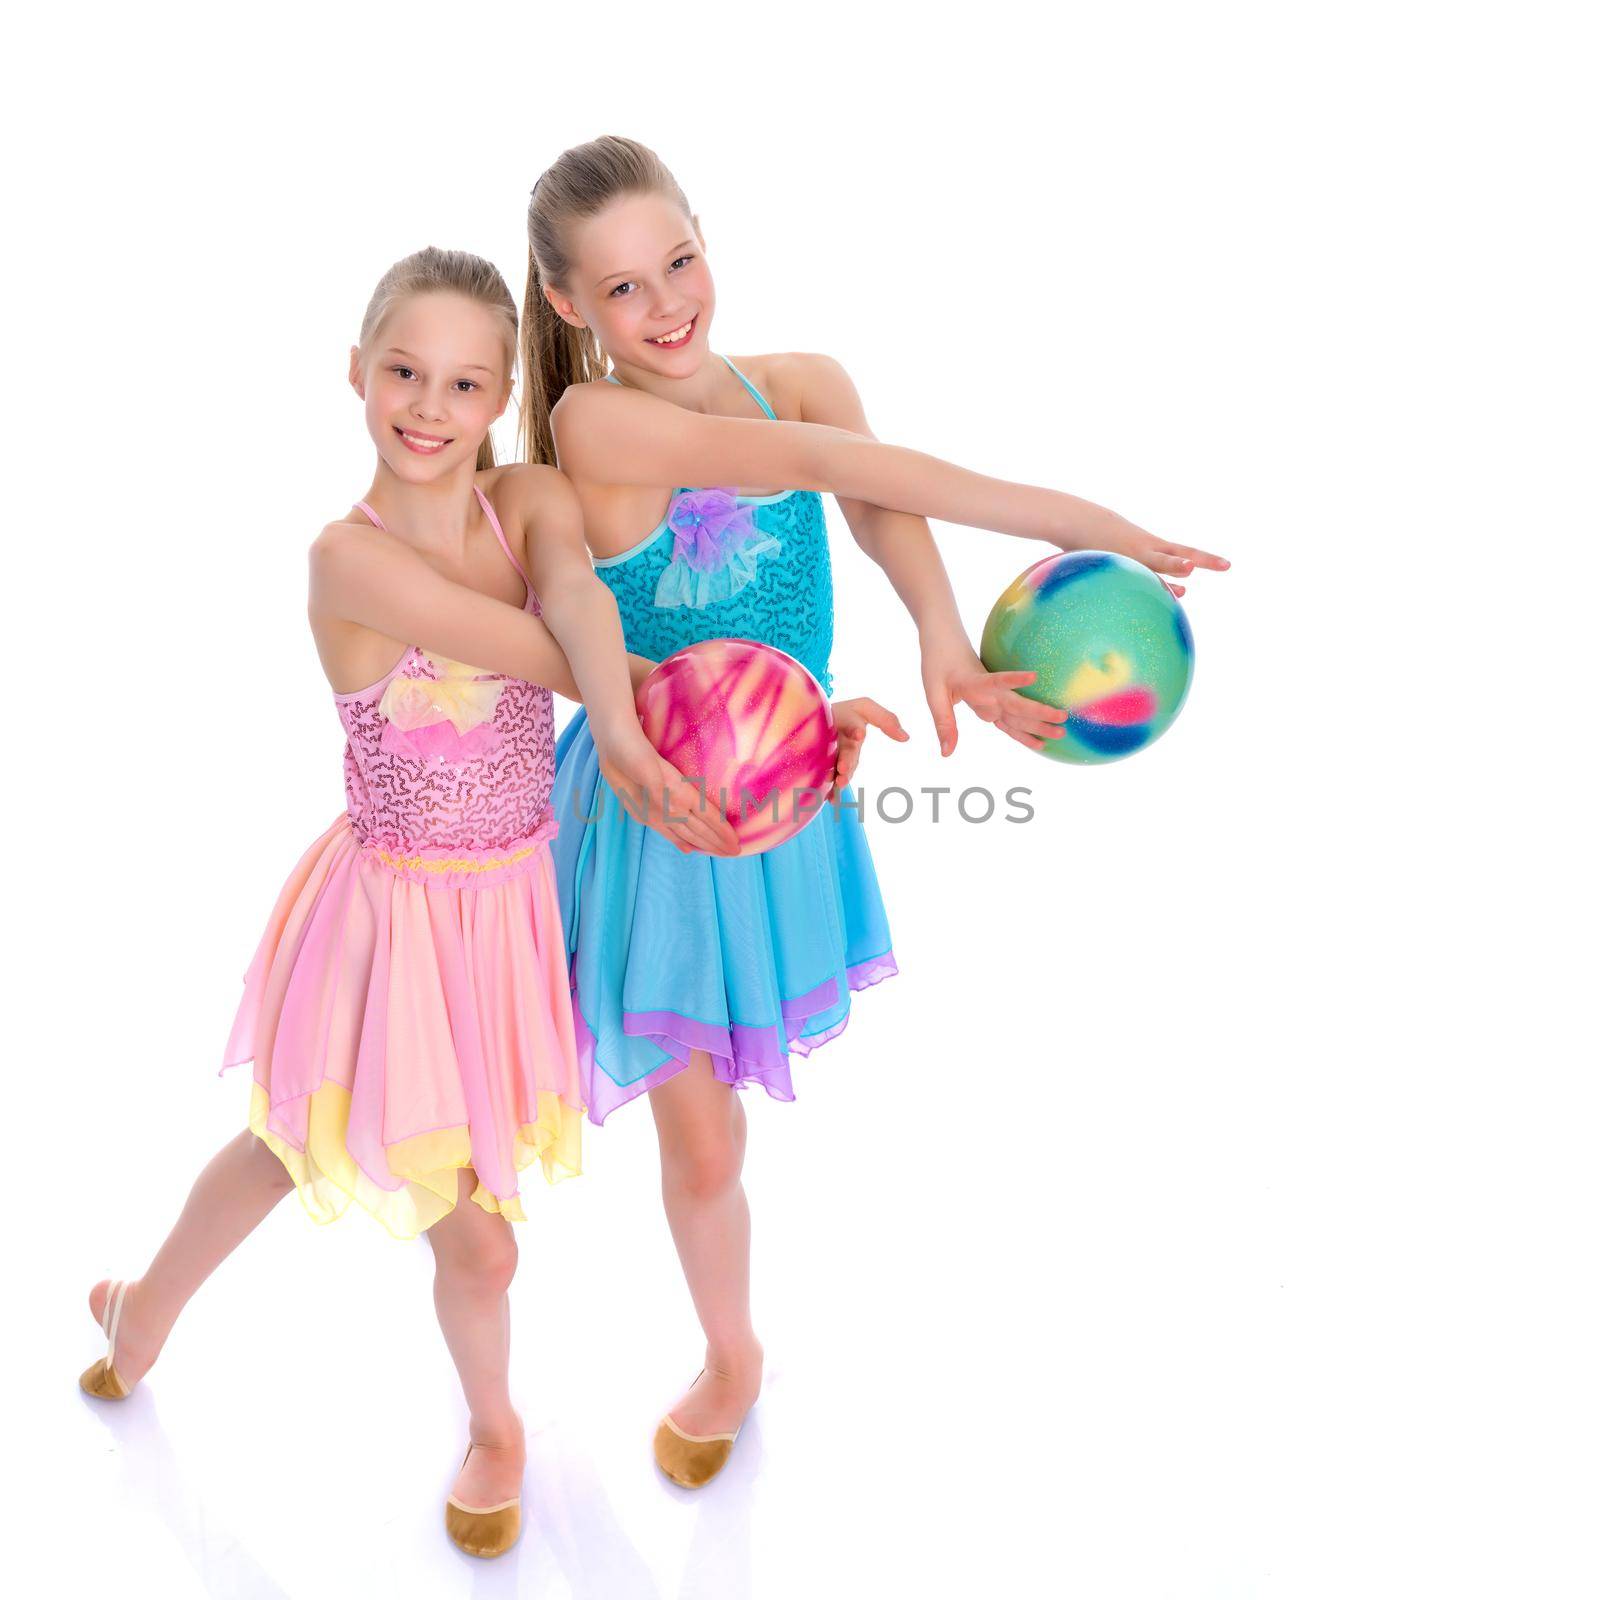 Two cheerful little girls gymnasts in competitions, perform exercises with the ball. The concept of children's sports, fitness, healthy lifestyle. Isolated on white background.